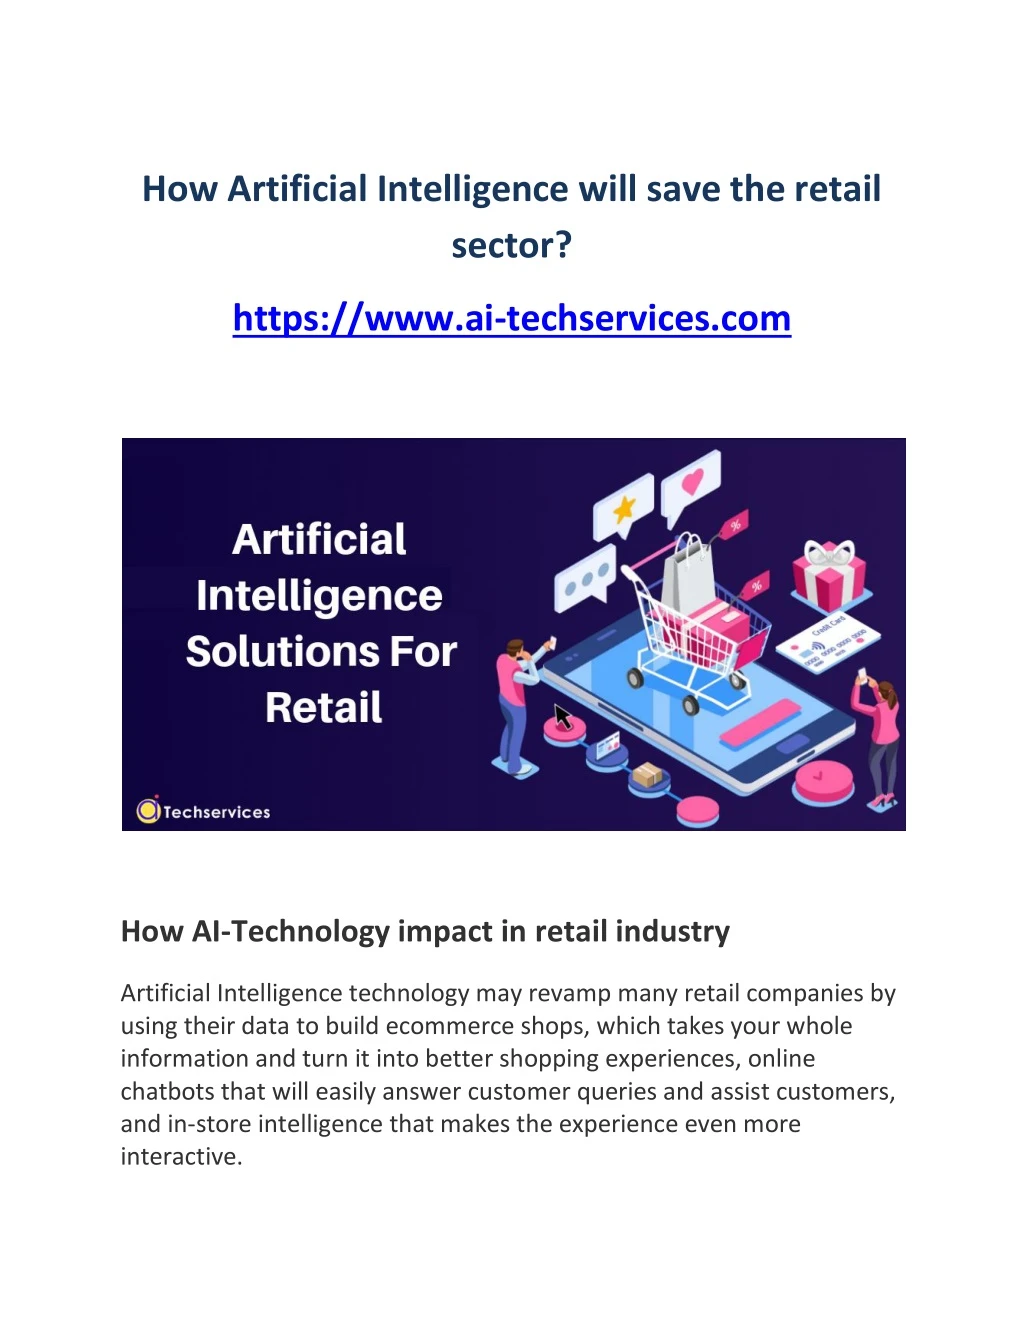 how artificial intelligence will save the retail